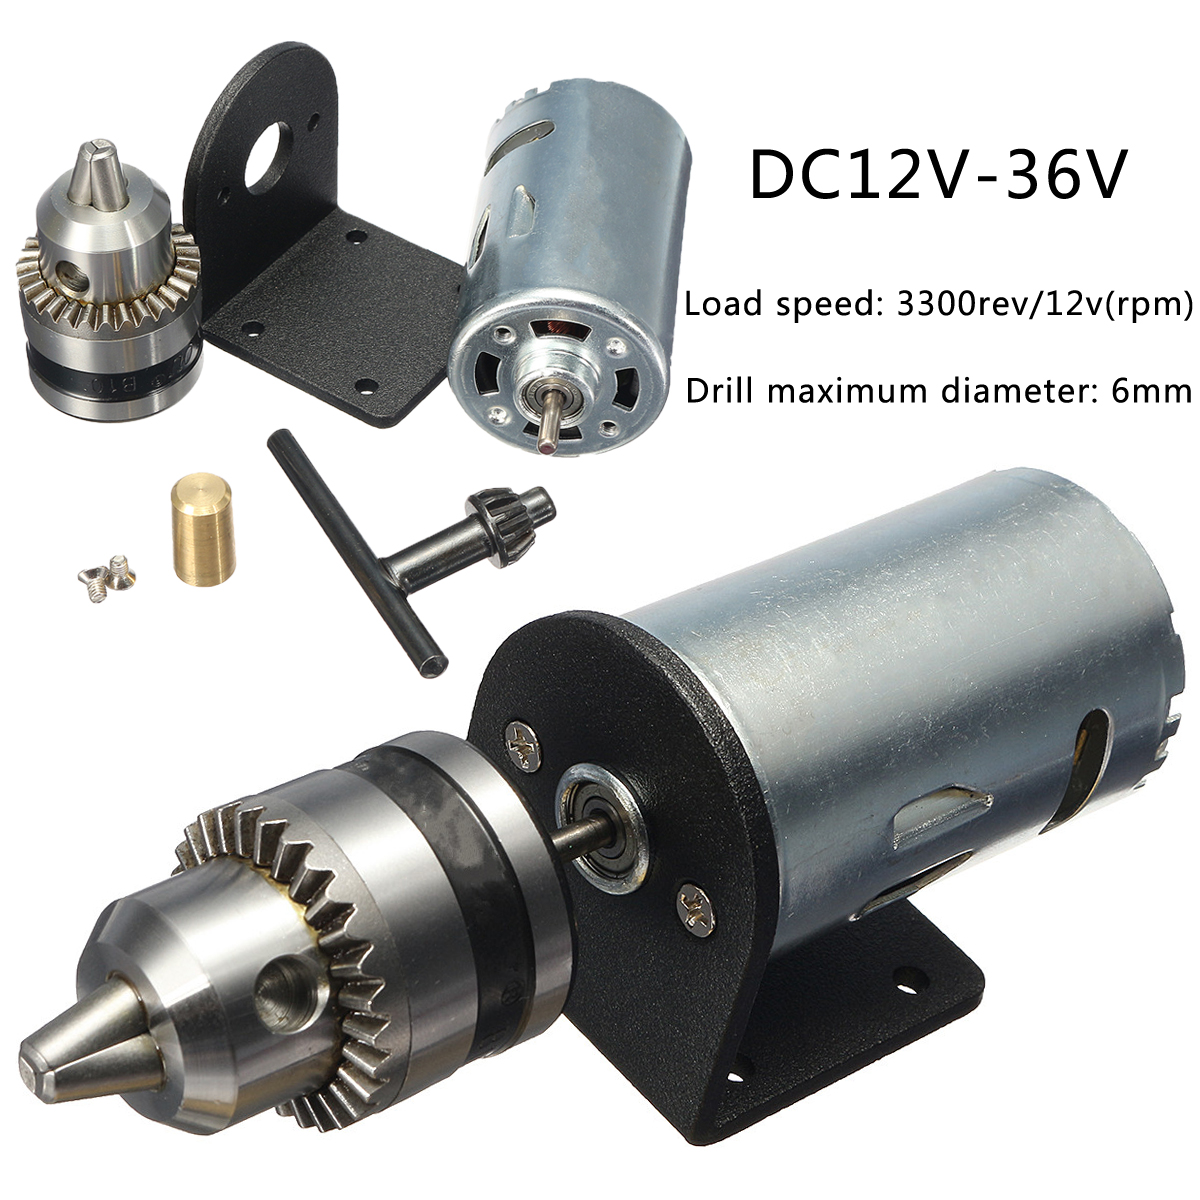 Machifit-DC-12-36V-Lathe-Press-555-Motor-With-Miniature-Hand-Drill-Chuck-and-Mounting-Bracket-1144675-1